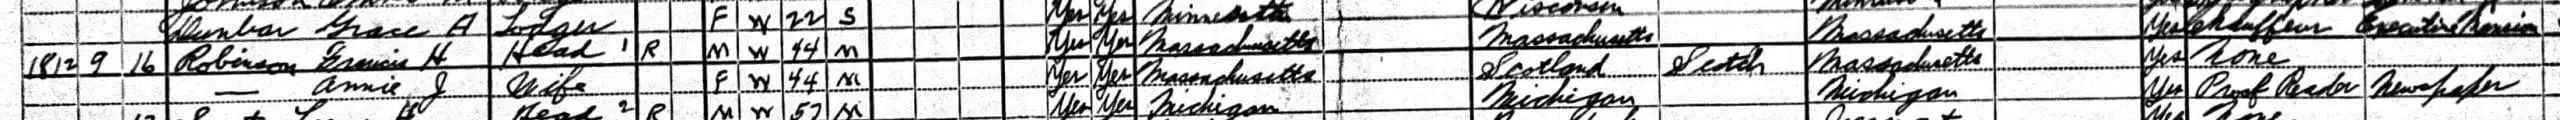 Francis H. Robinson in the 1920 U.S. Census